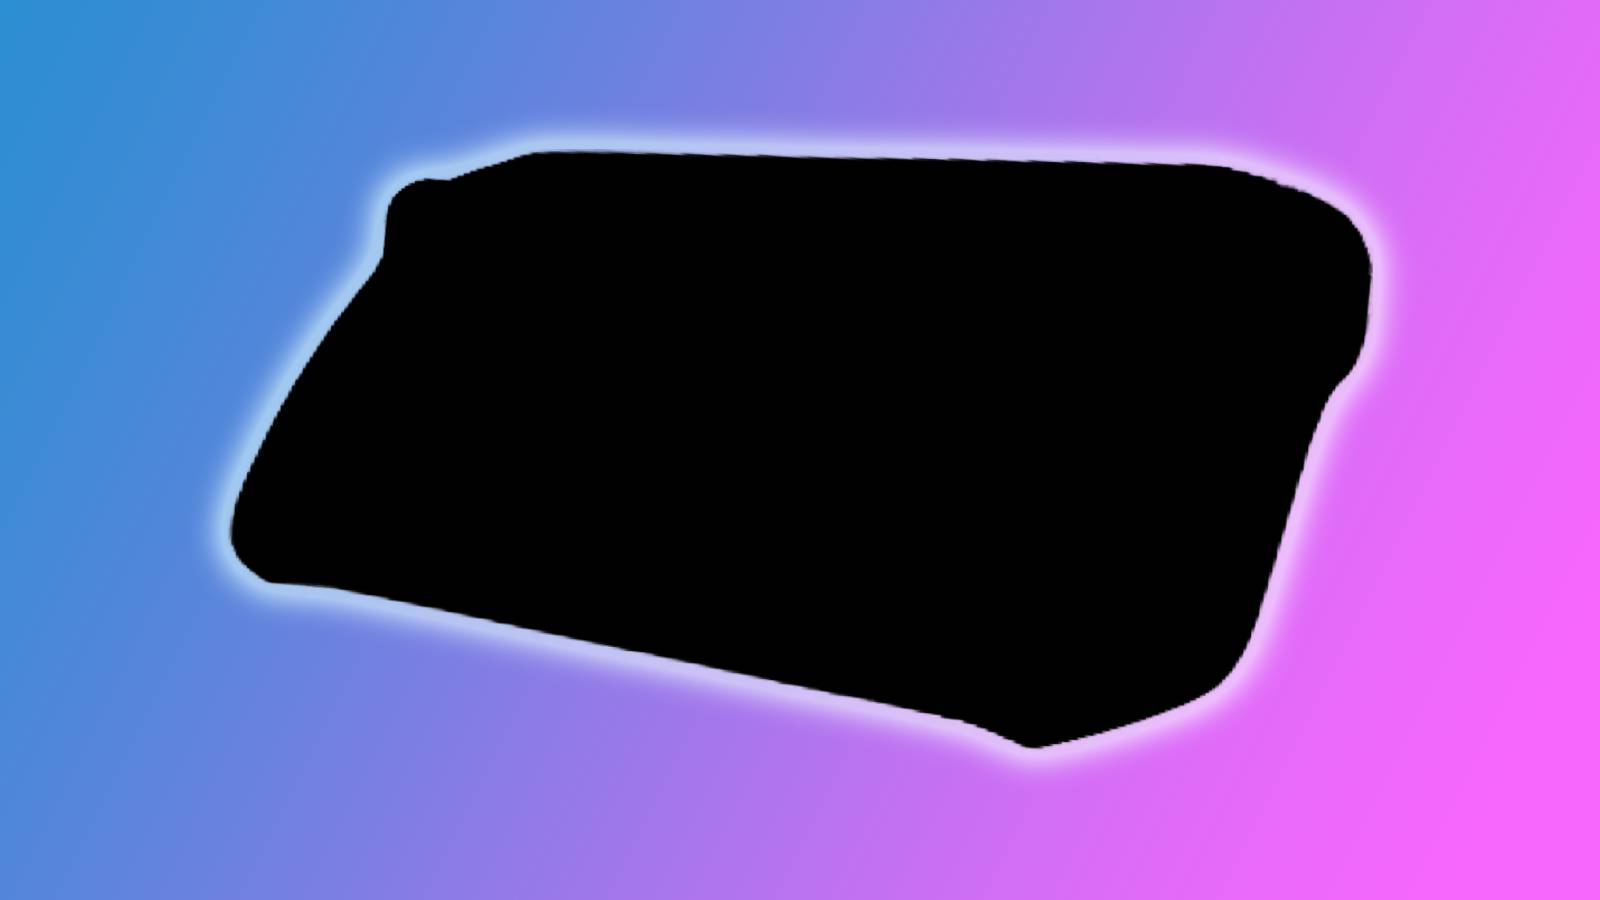 A darkened silhouette of the MSI Claw on a blue and pink background.